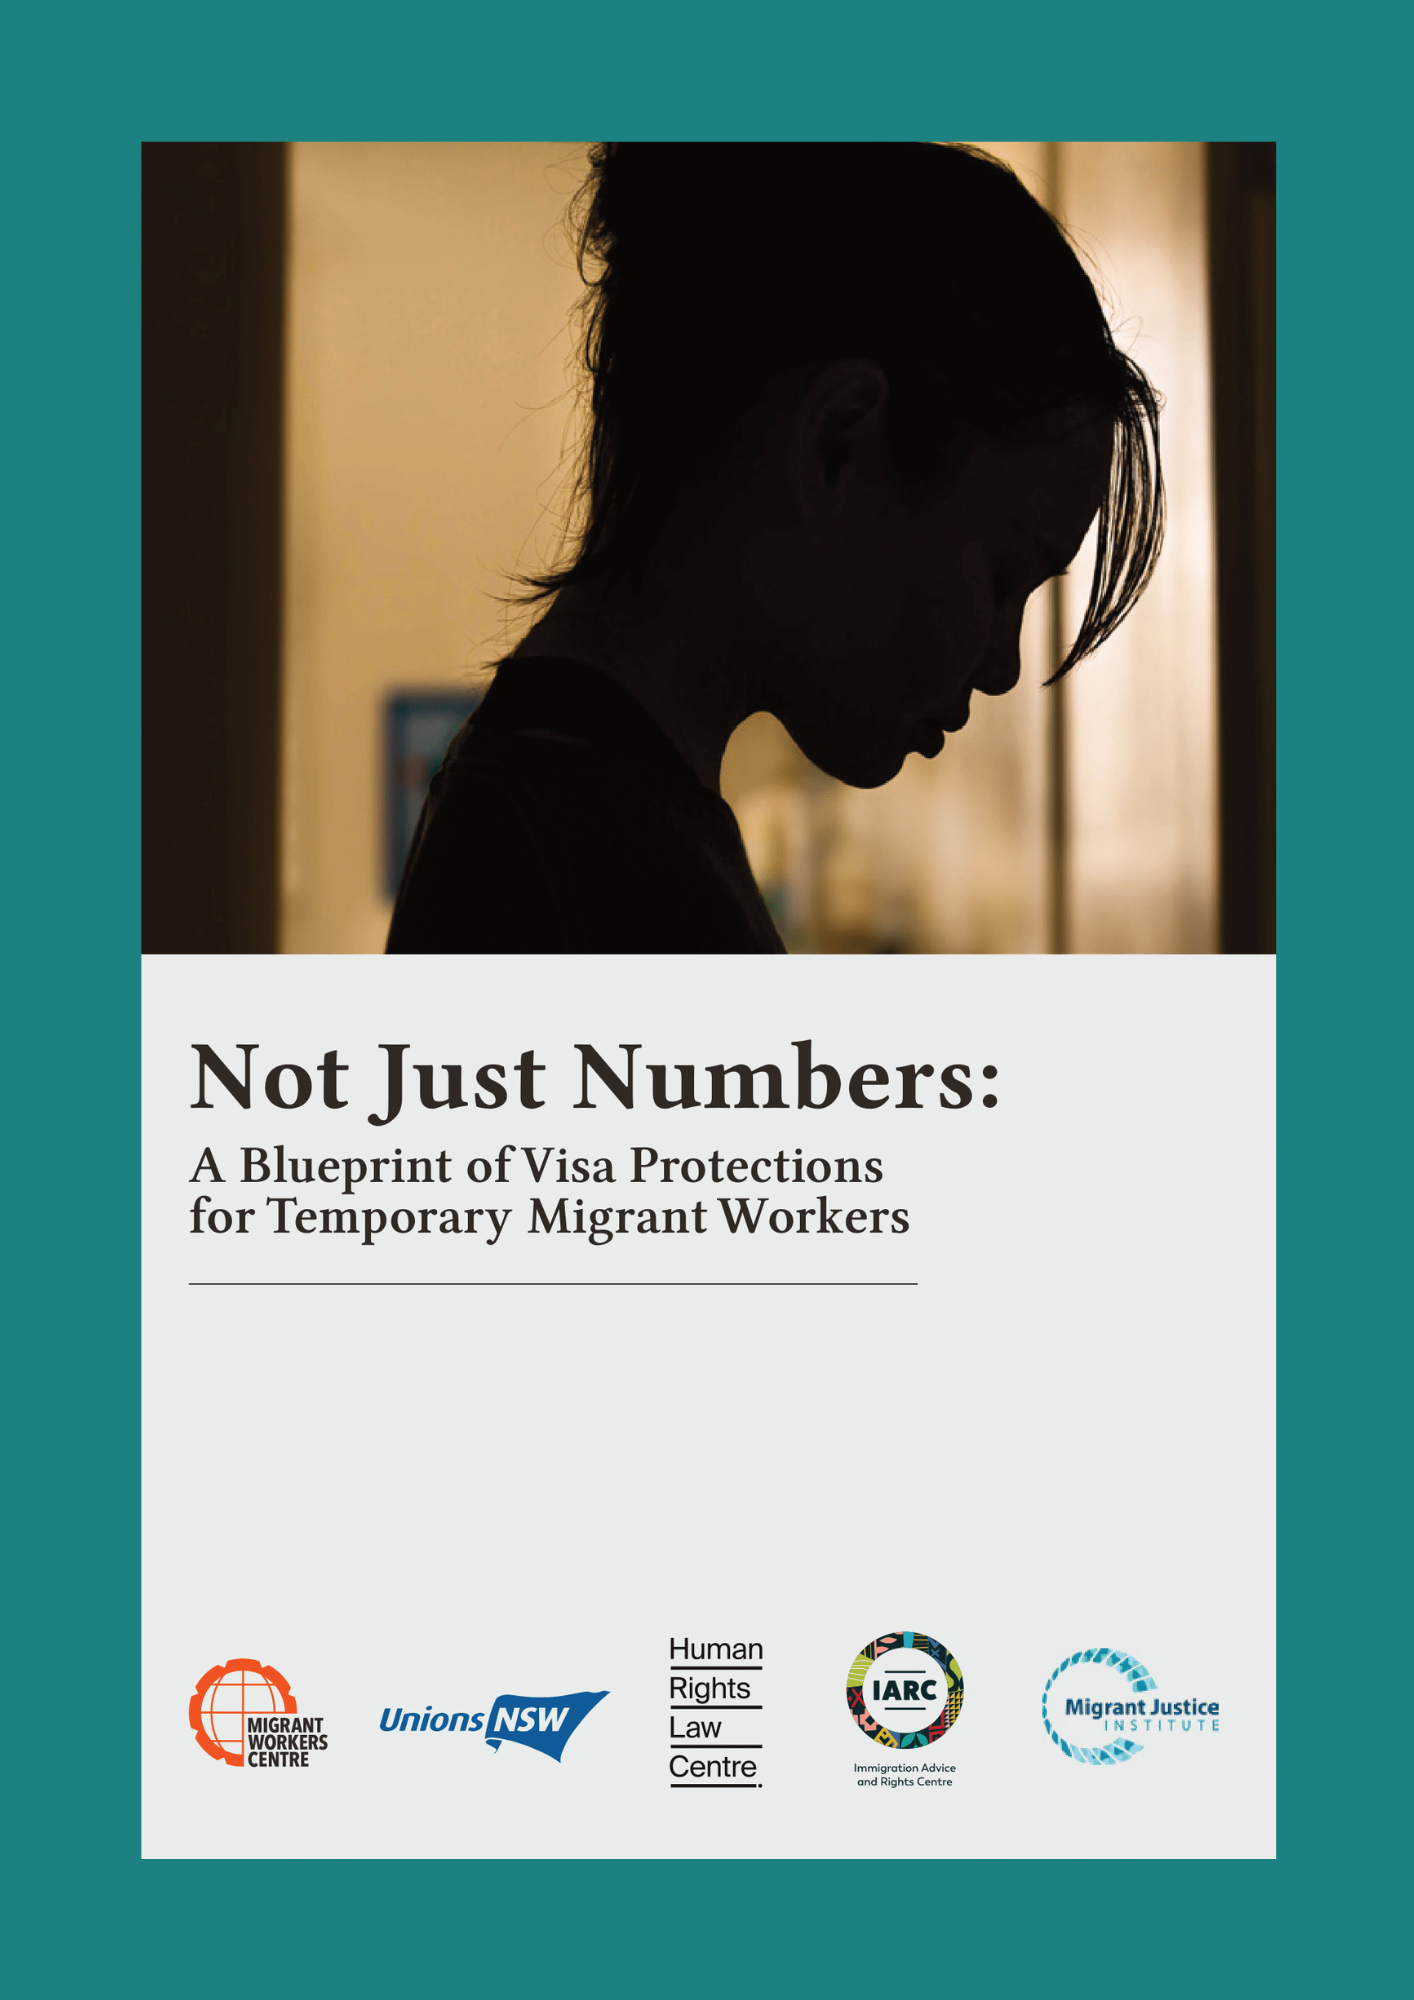 Not Just Numbers: A Blueprint of Visa Protections for Temporary Migrant Workers